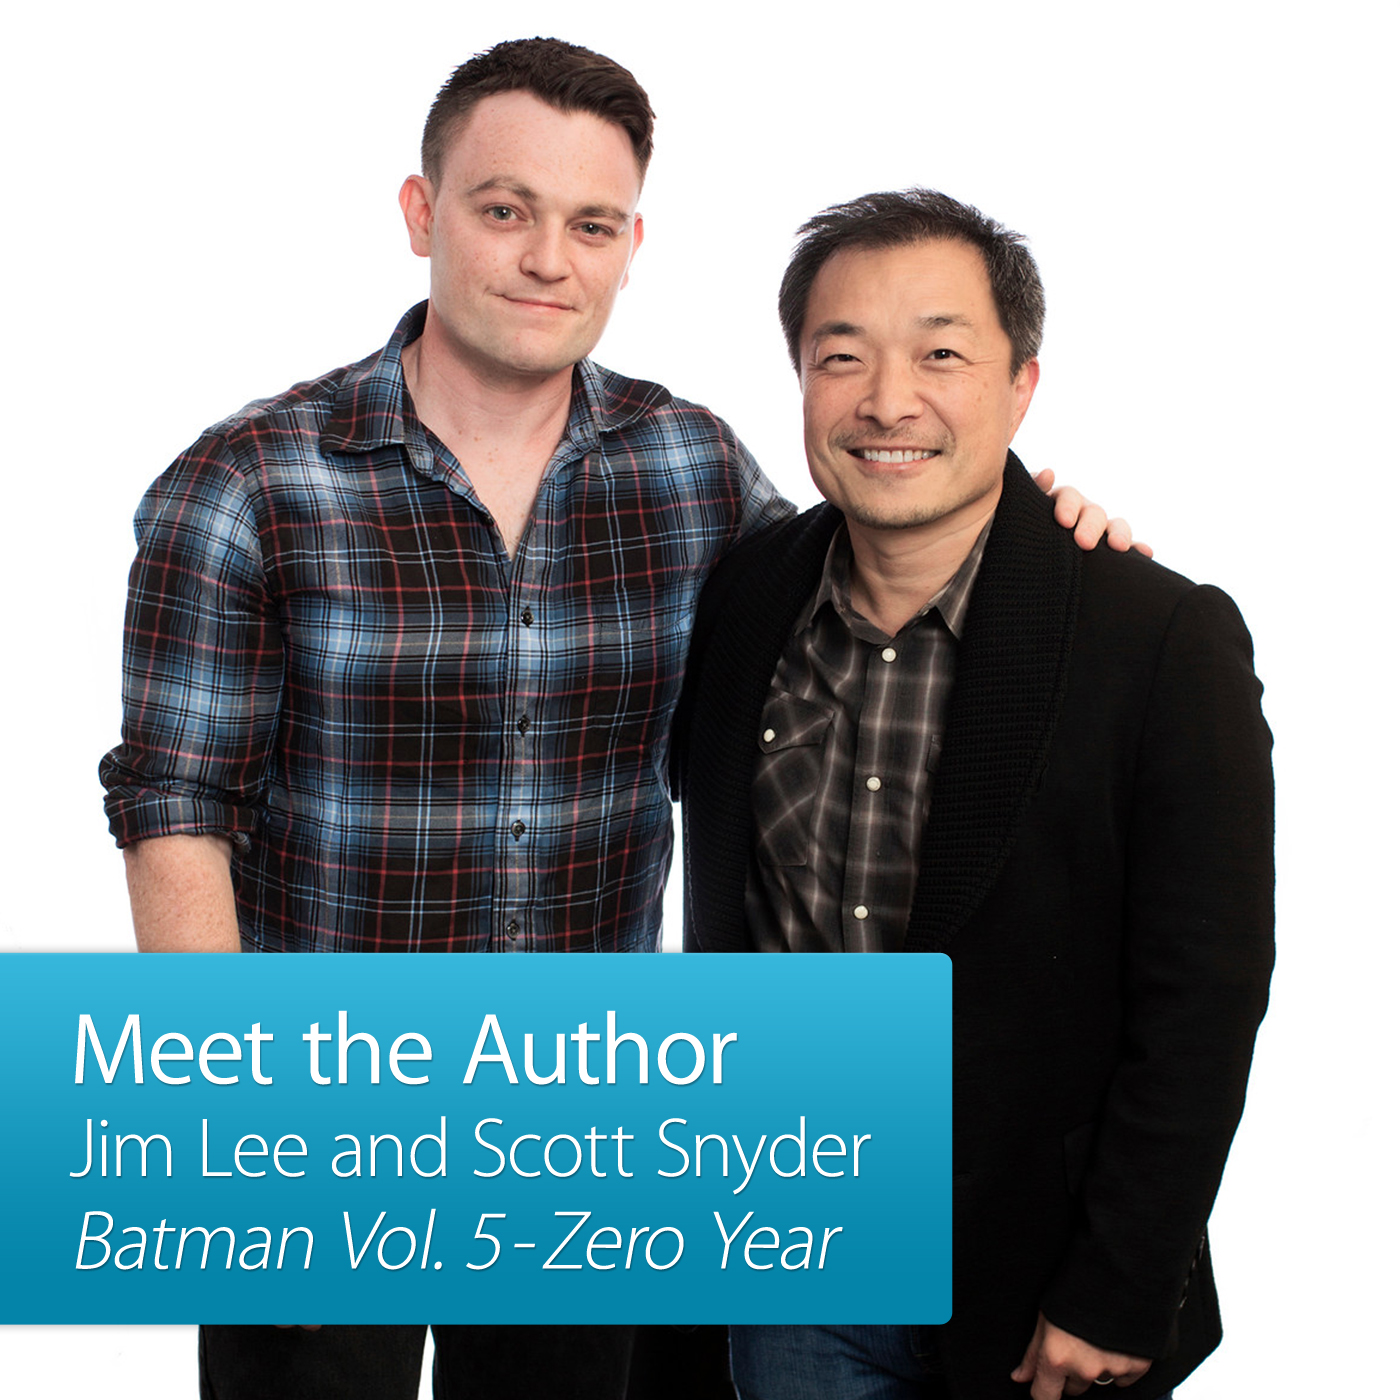 Jim Lee and Scott Snyder: Meet the Author